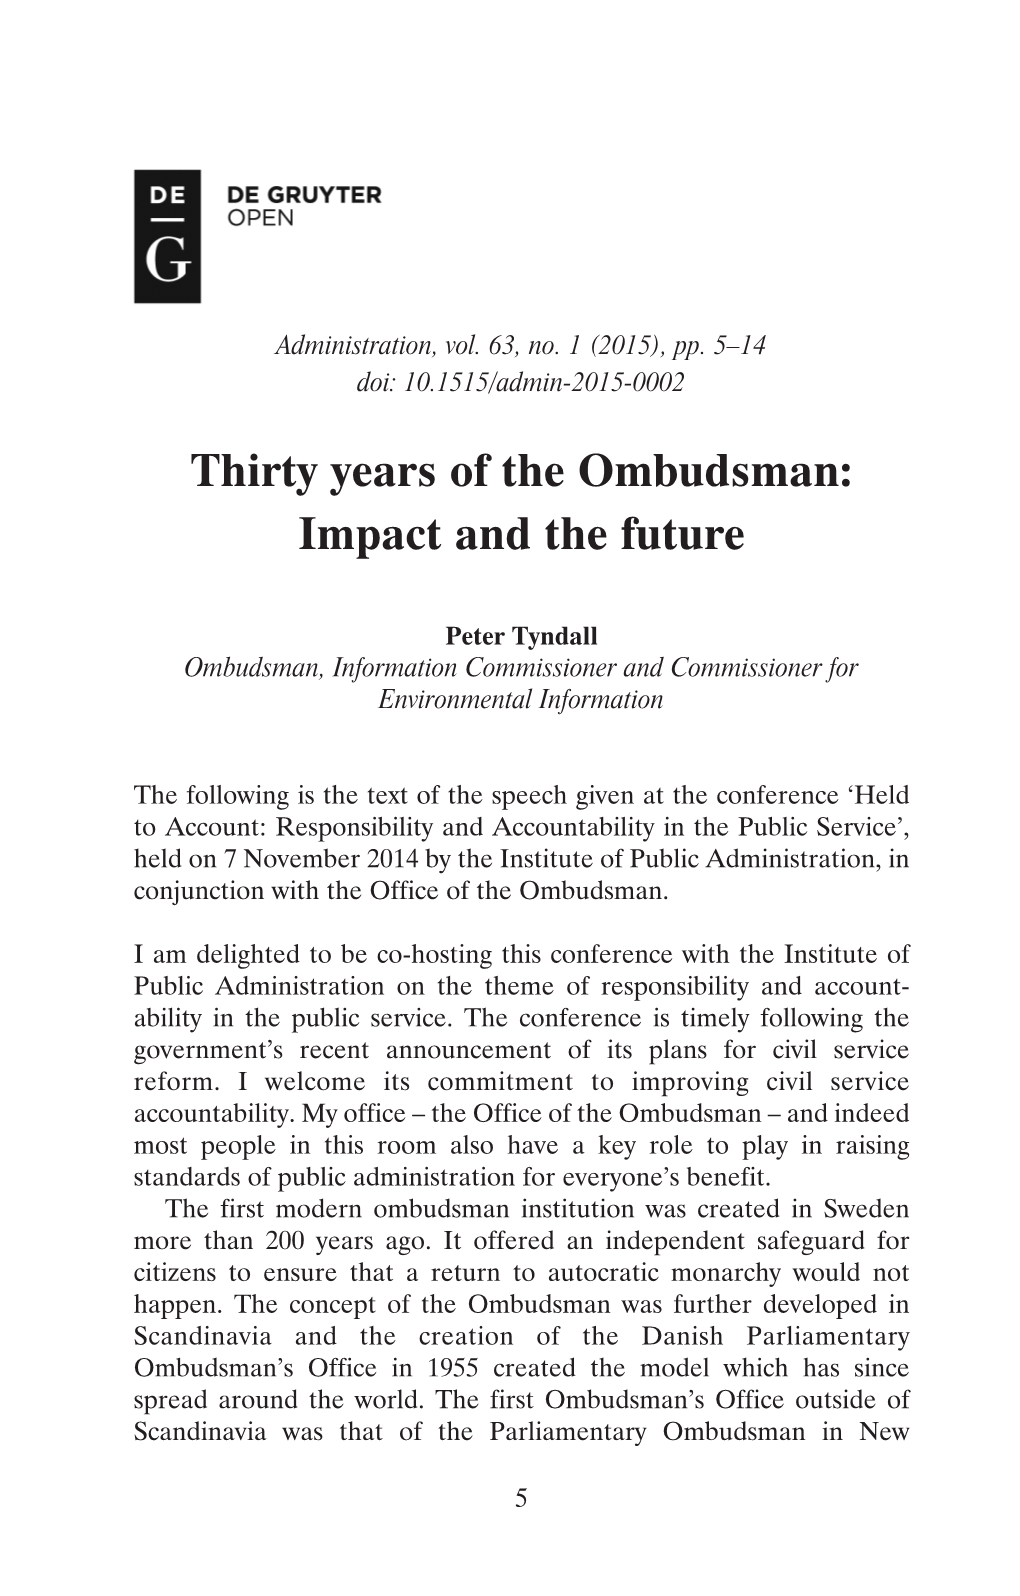 Thirty Years of the Ombudsman: Impact and the Future